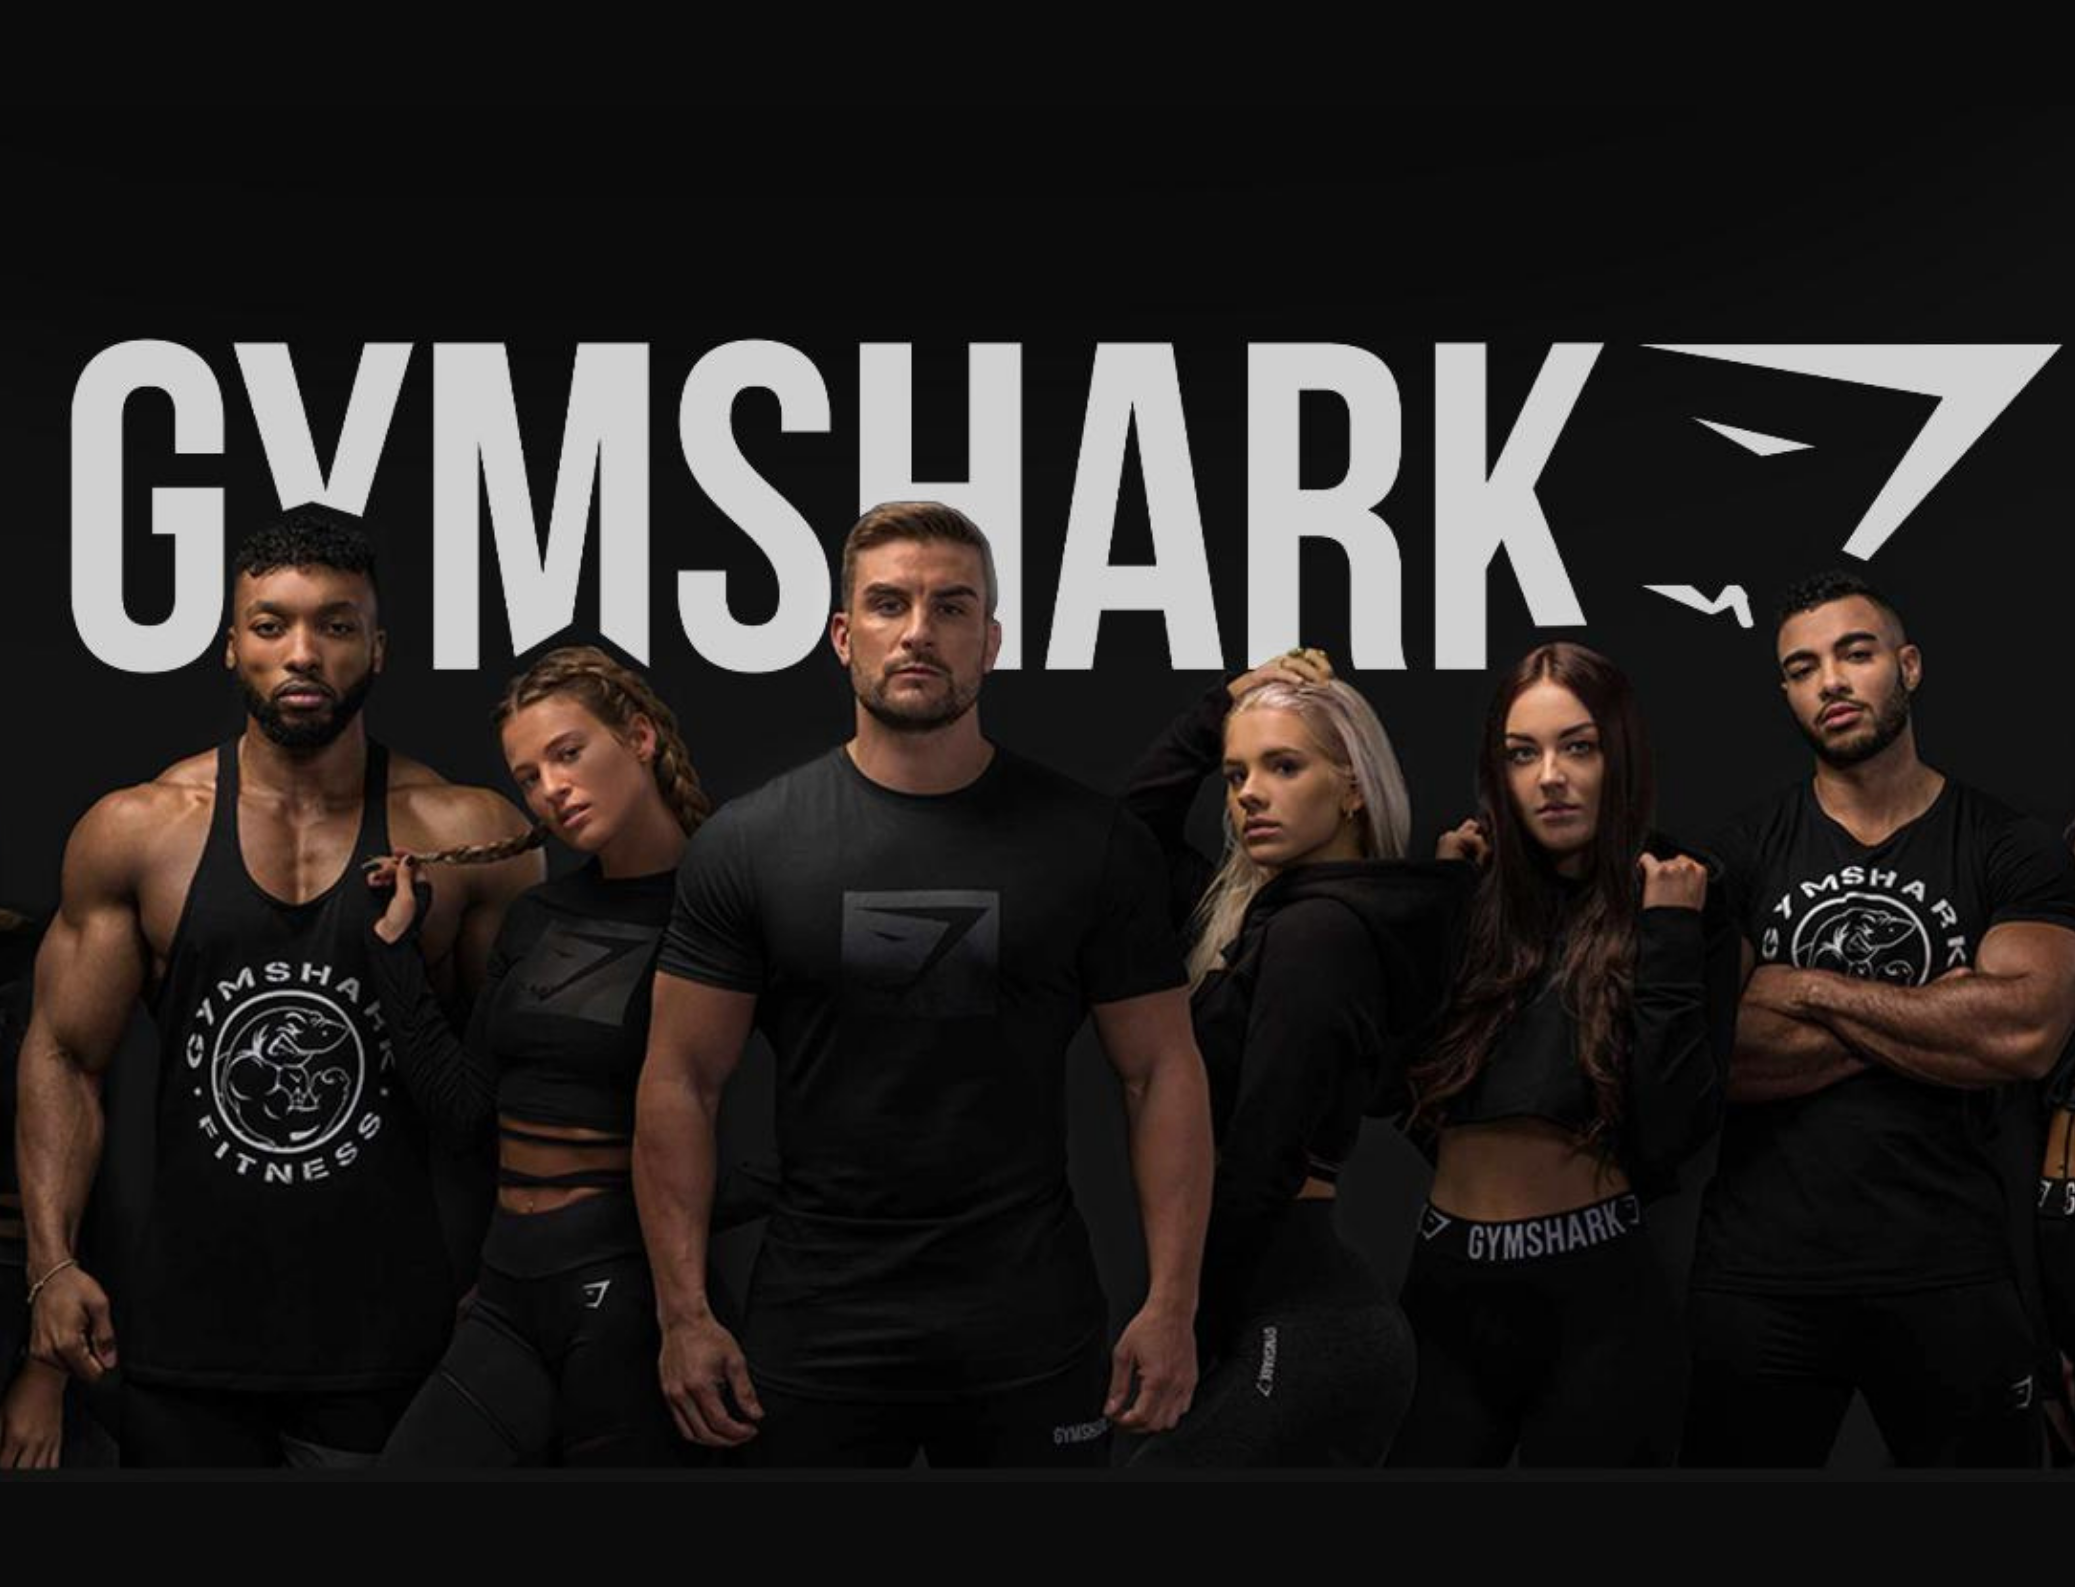 Gymshark's Winning Strategy: UGC and Community for Growth